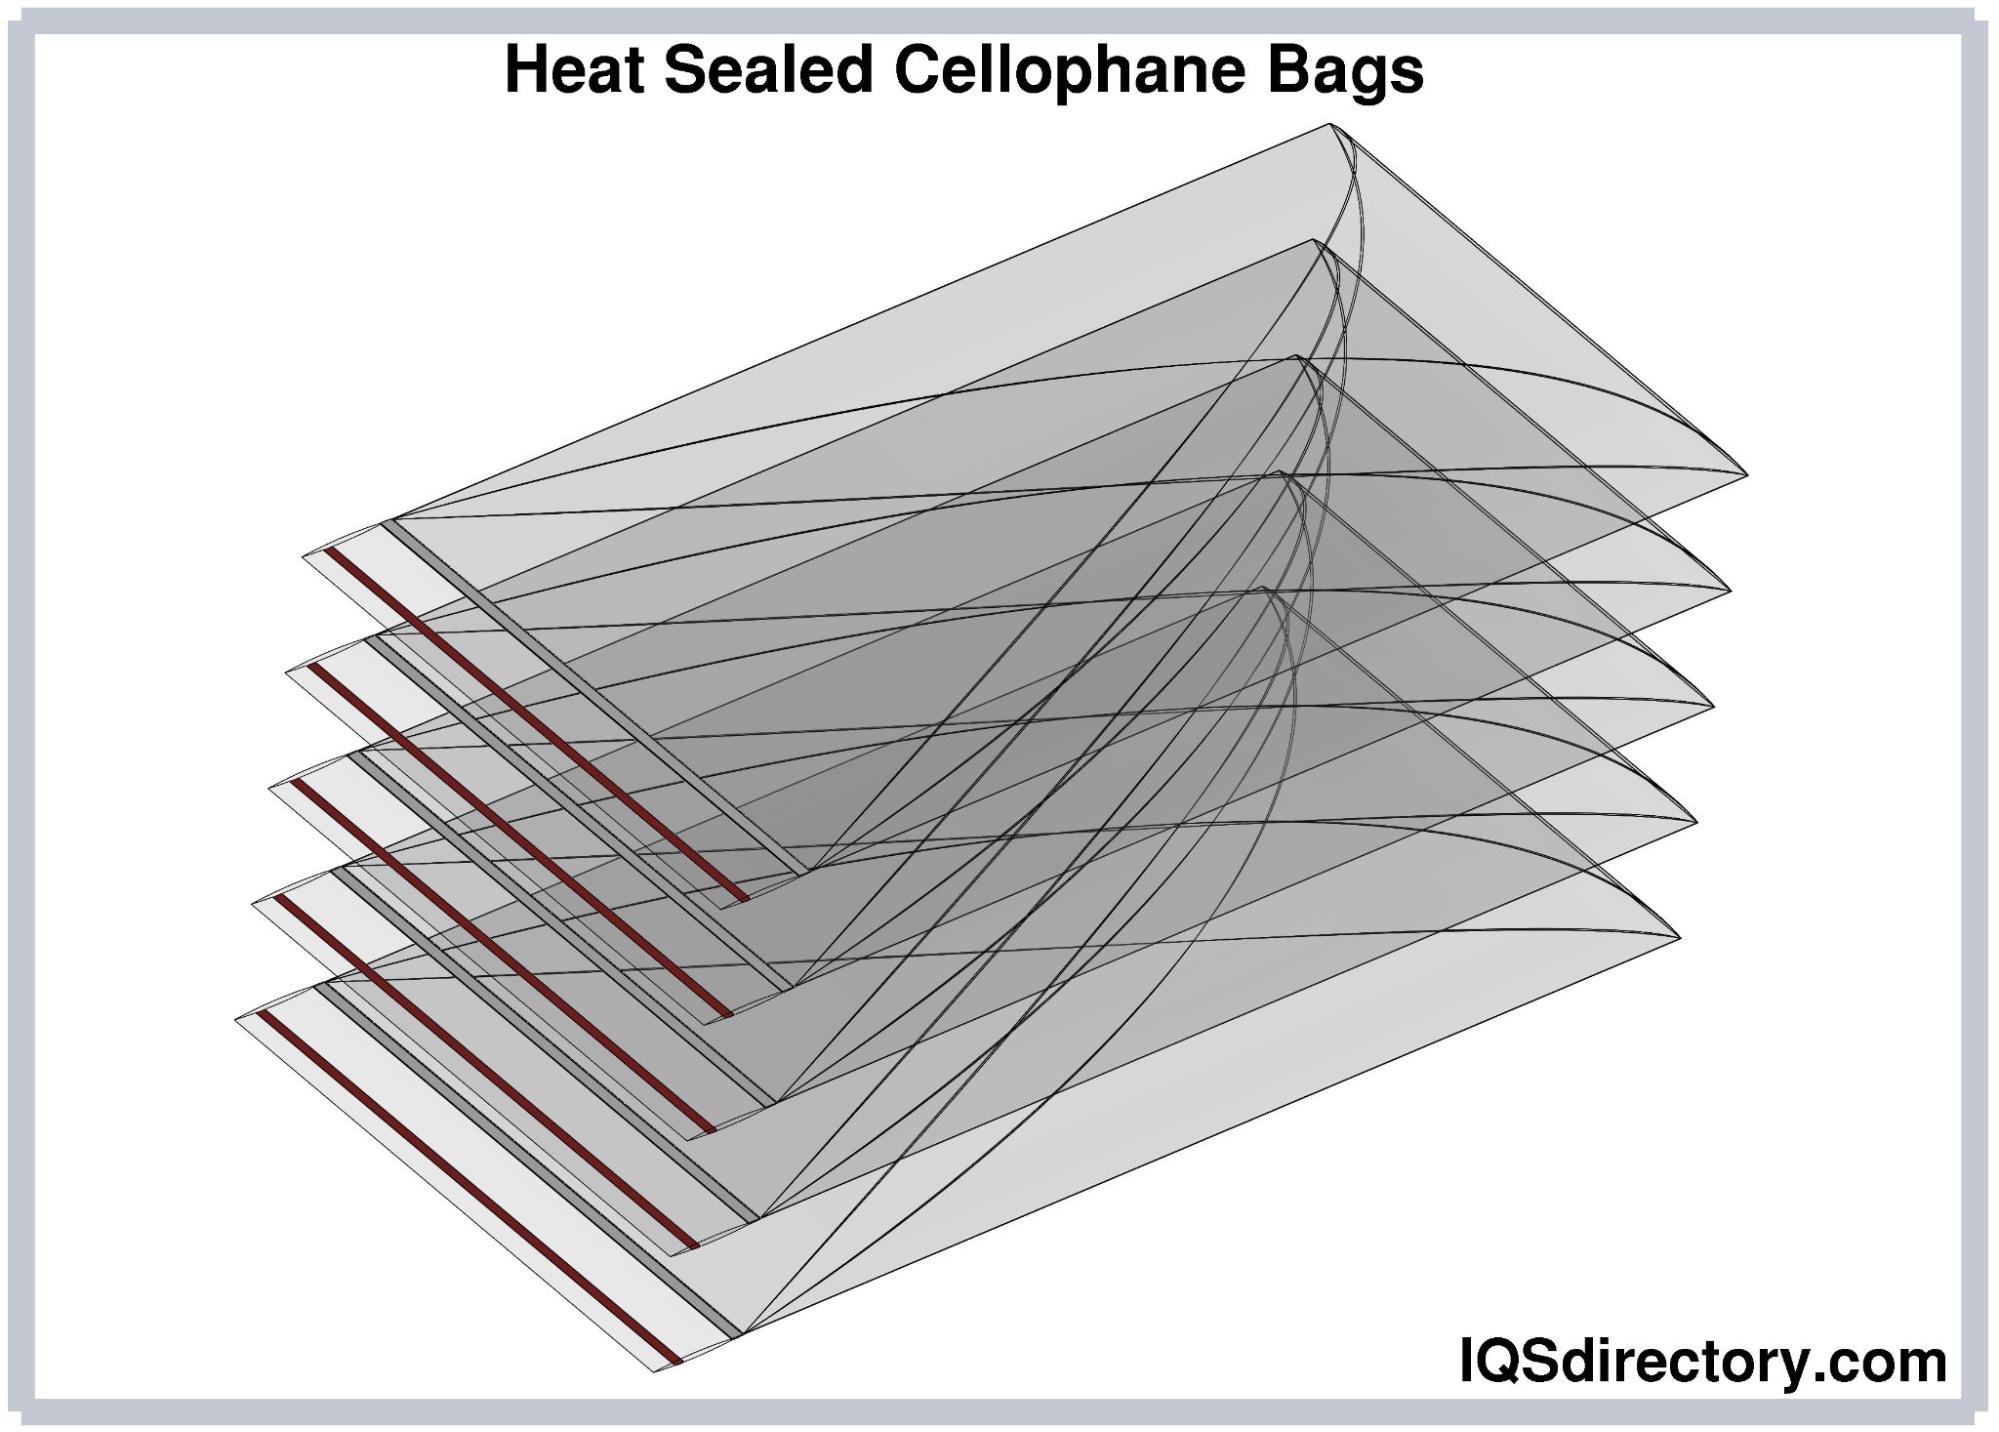  Heat Sealed Cellophane™ Bags